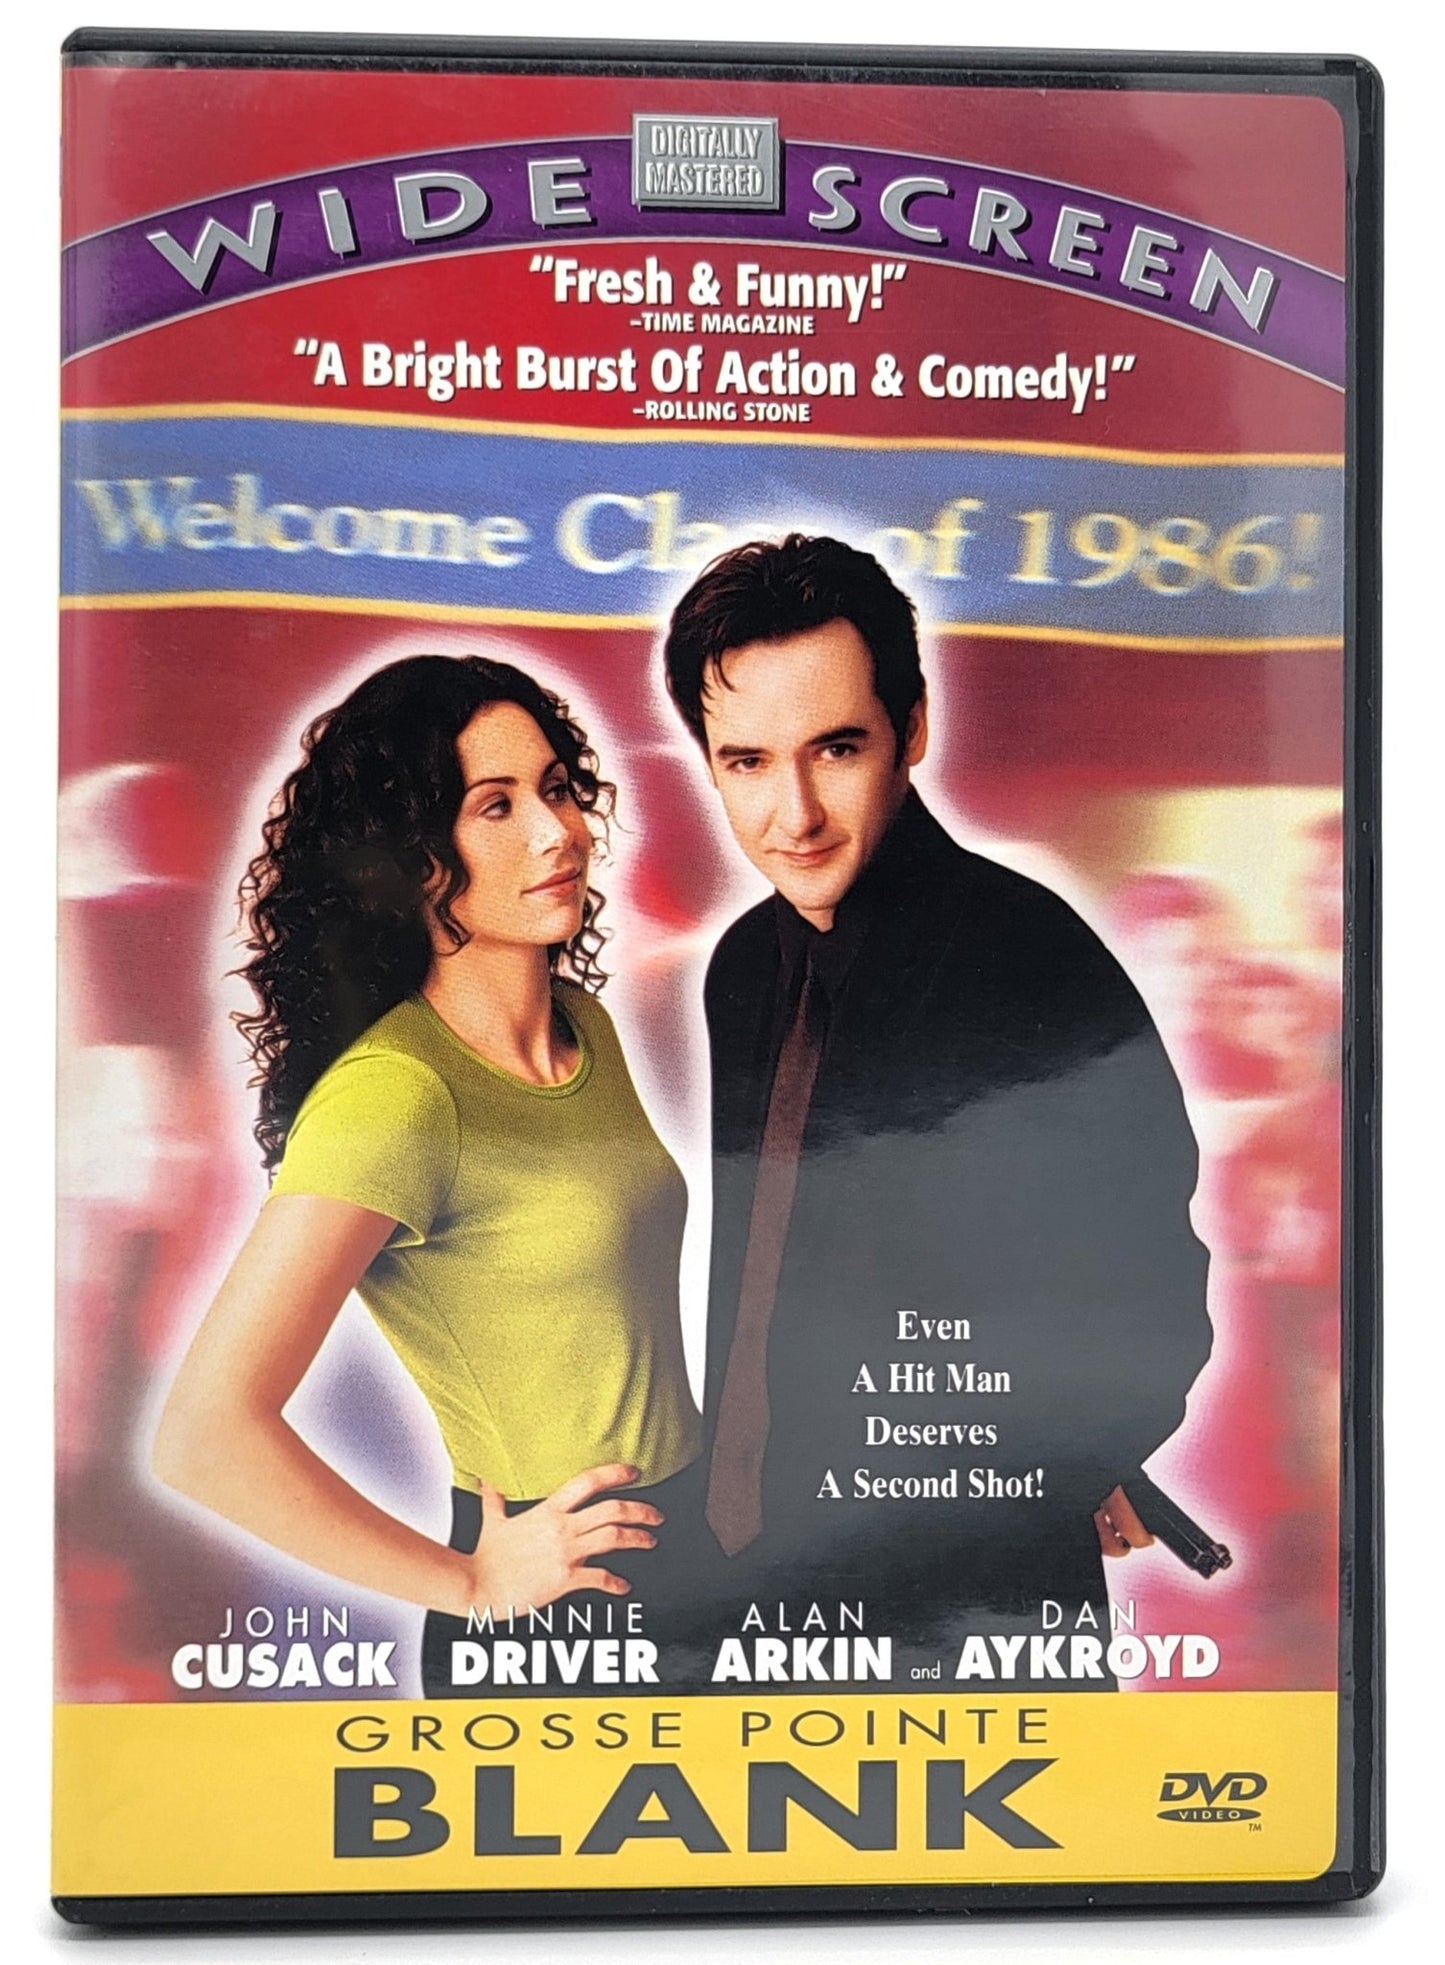 Hollywood Pictures Home Entertainment - Grosse Pointe Blank | DVD | Widescreen - DVD - Steady Bunny Shop